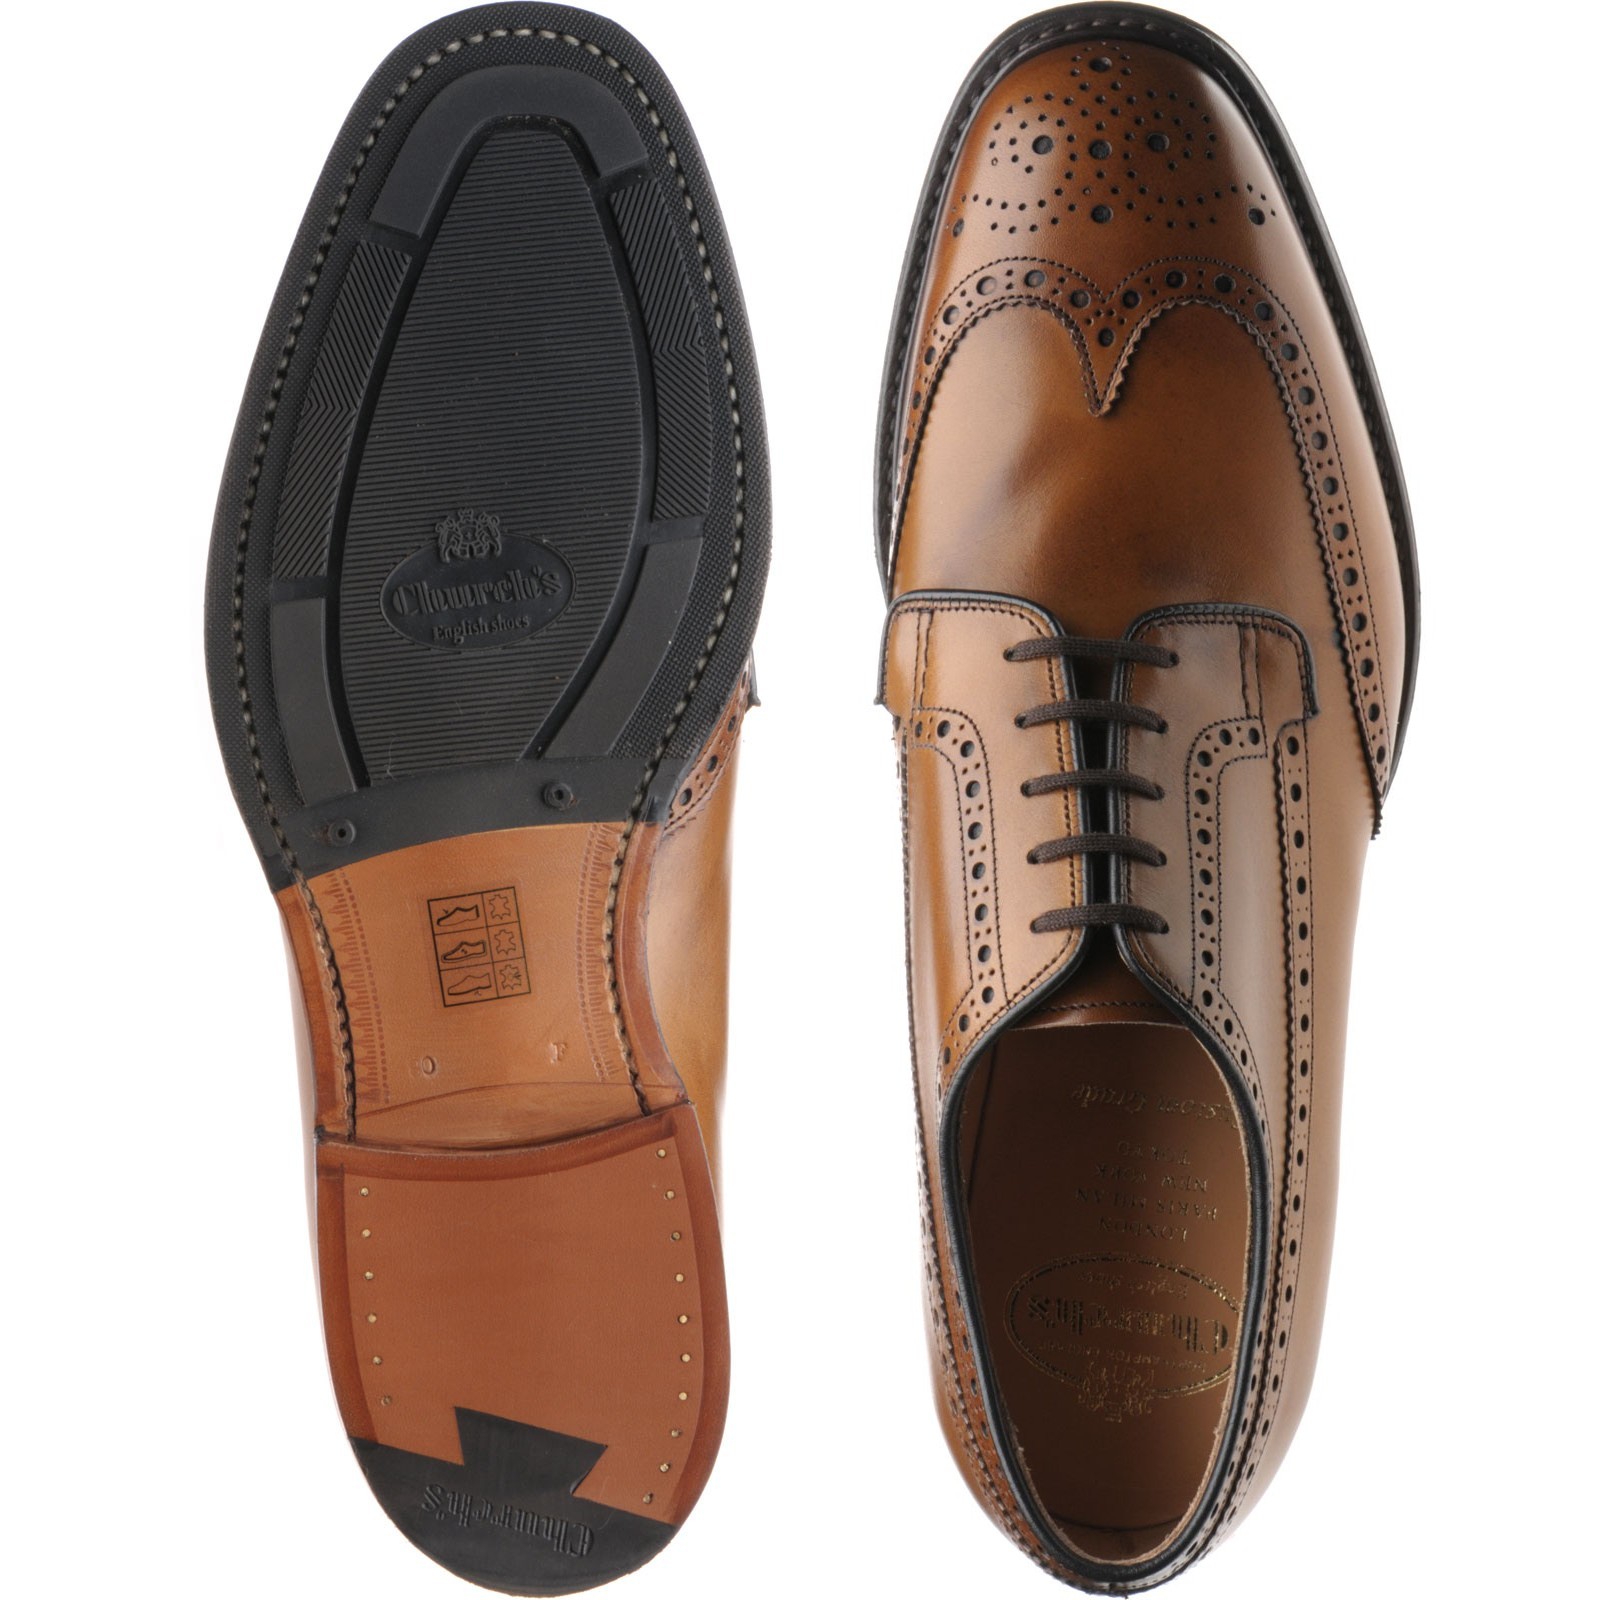 Church shoes | Church Custom Grade | Thickwood Derby shoes in Chestnut ...